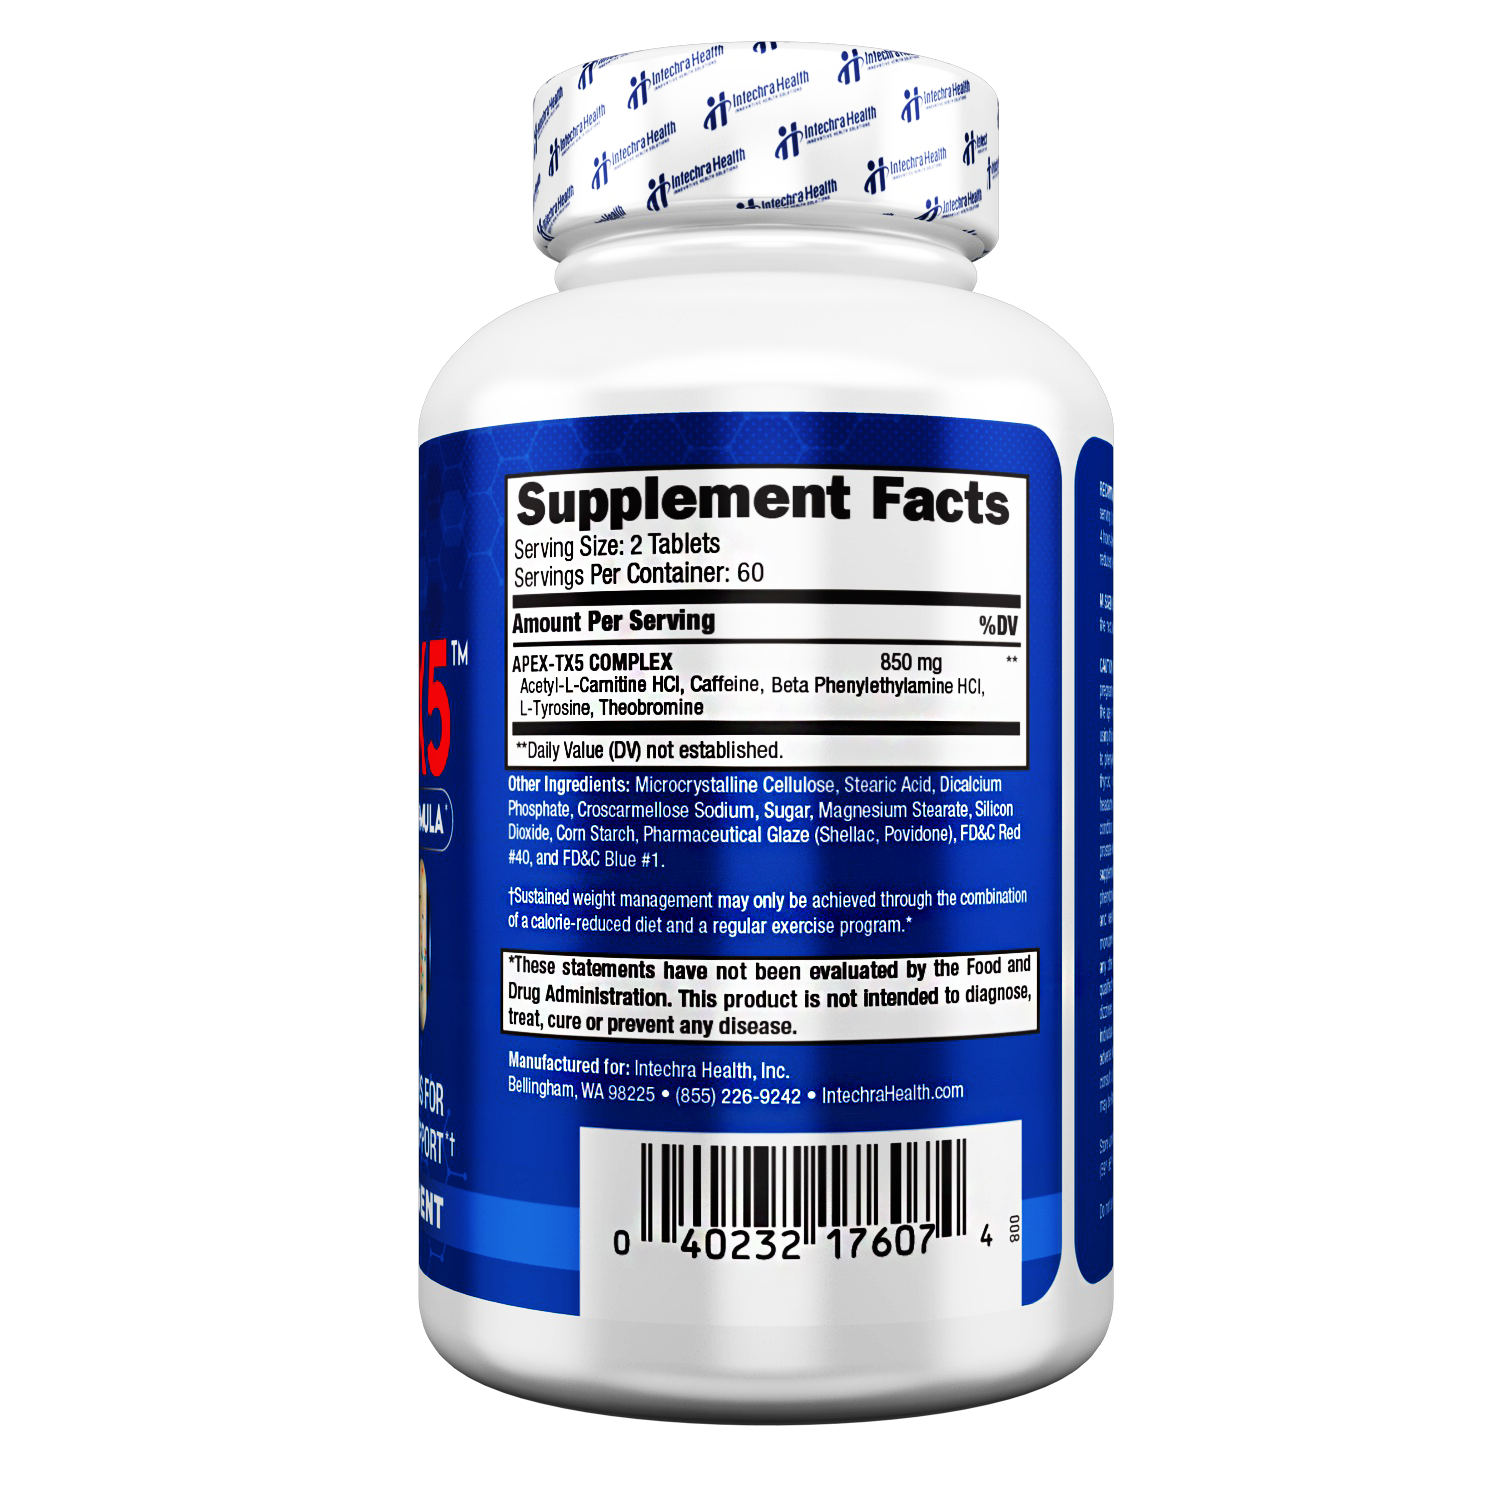 APEX-TX5 Diet Pills - Weight Management & Energy Support, 120 Tablets Per Bottle - image 5 of 7